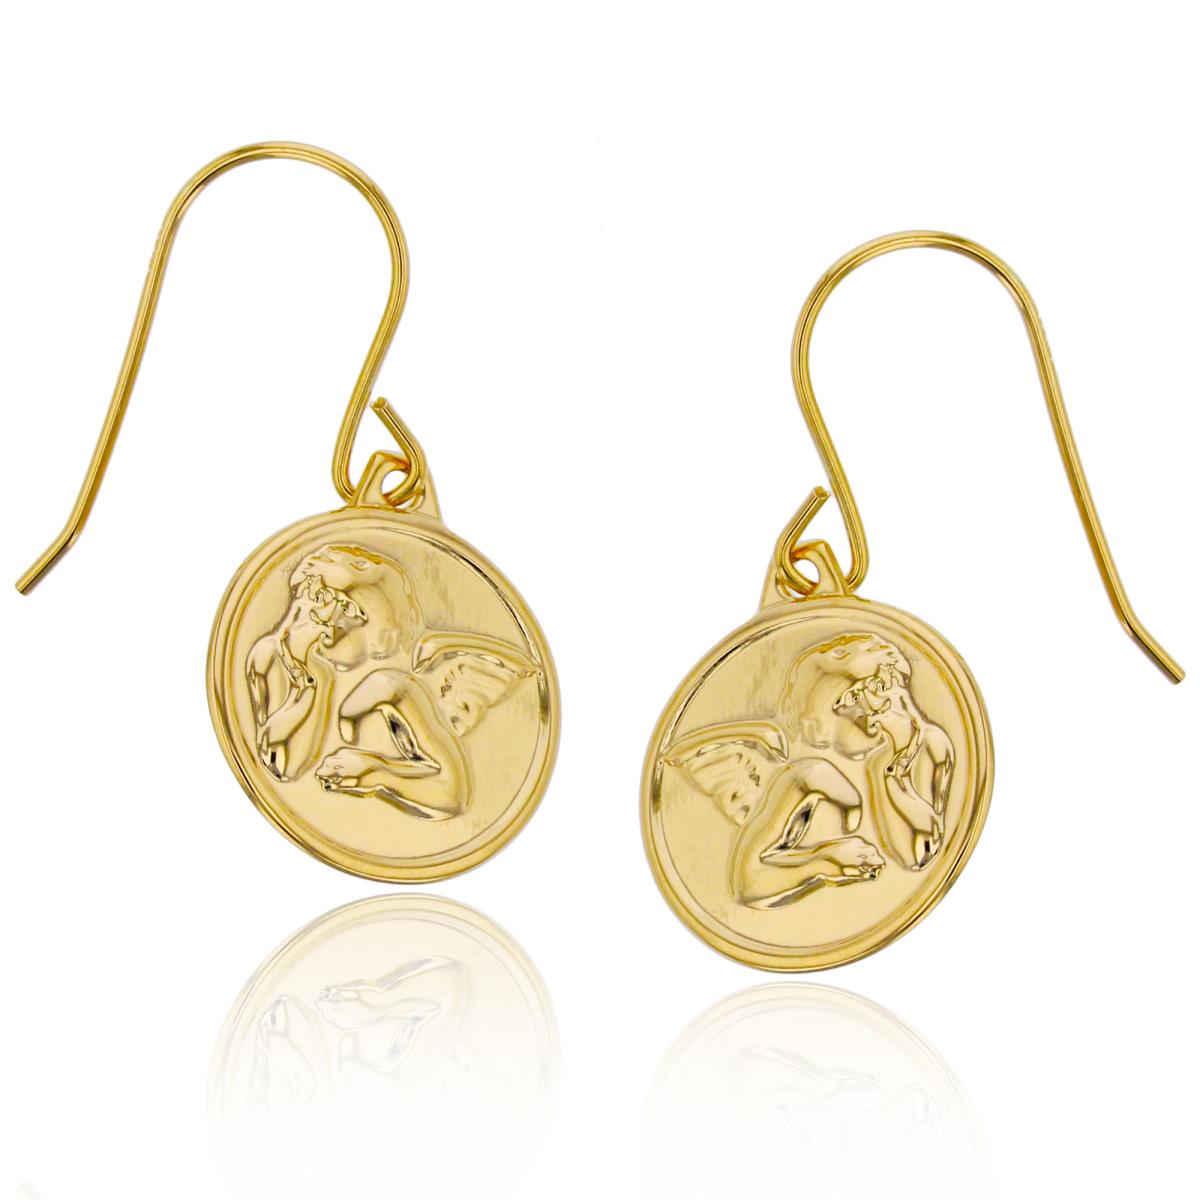 10K Yellow Gold High Polished Angel Round Plate Dangling Fish-Hook Earring